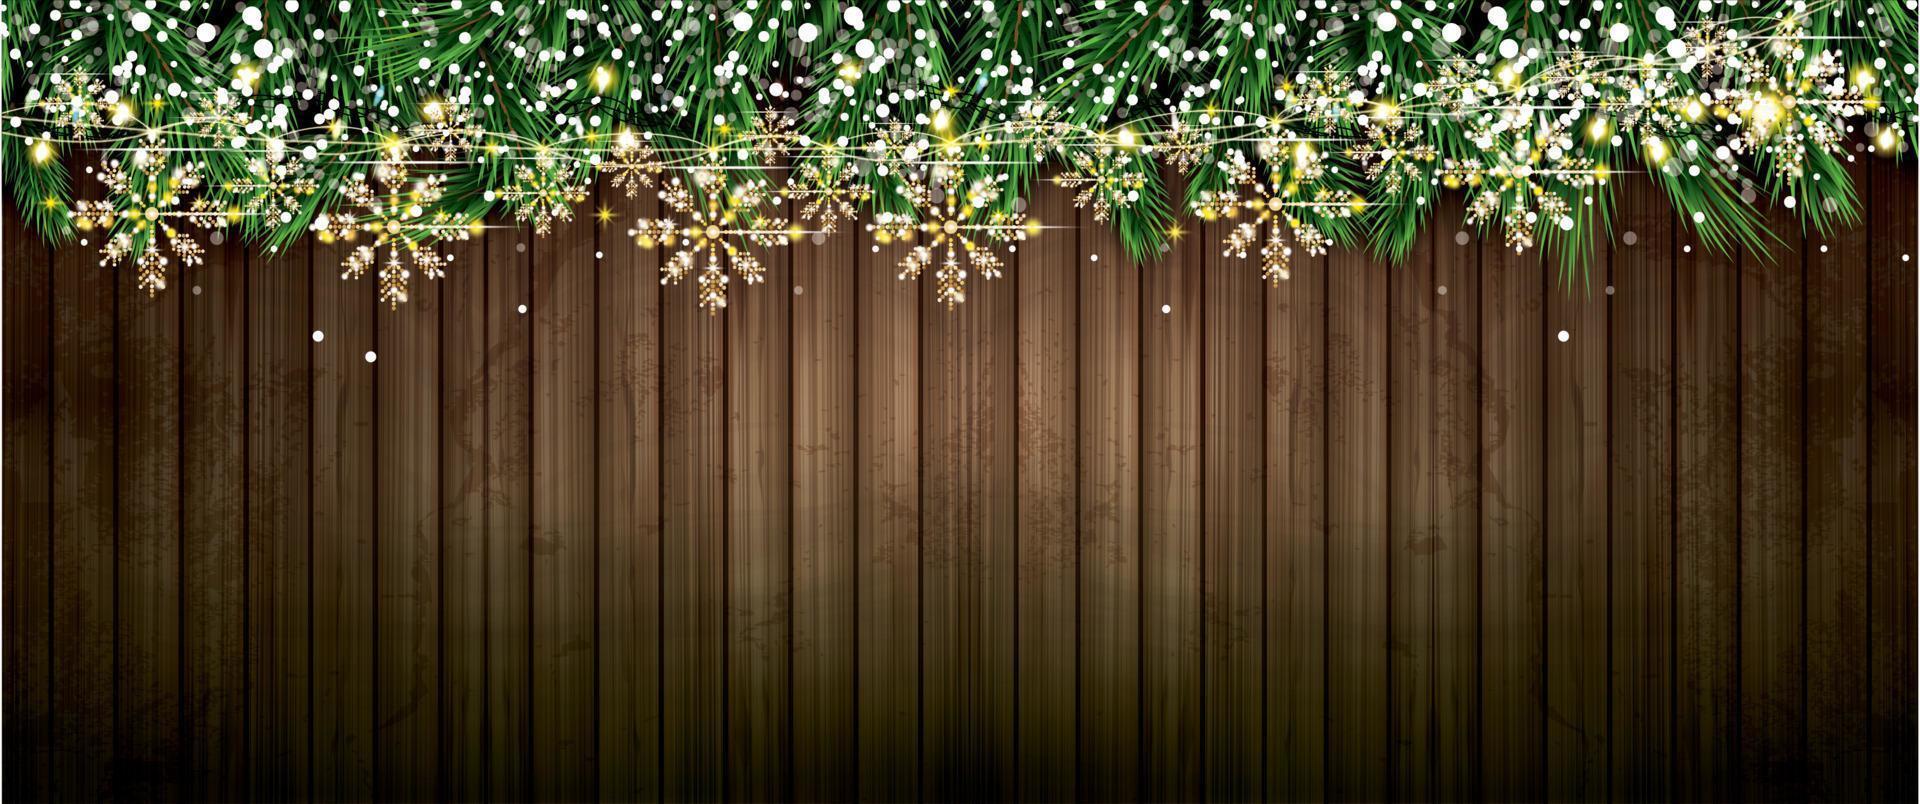 Fir Branch with Neon Lights, Golden Garland with Snowflakes on Wooden Background. vector